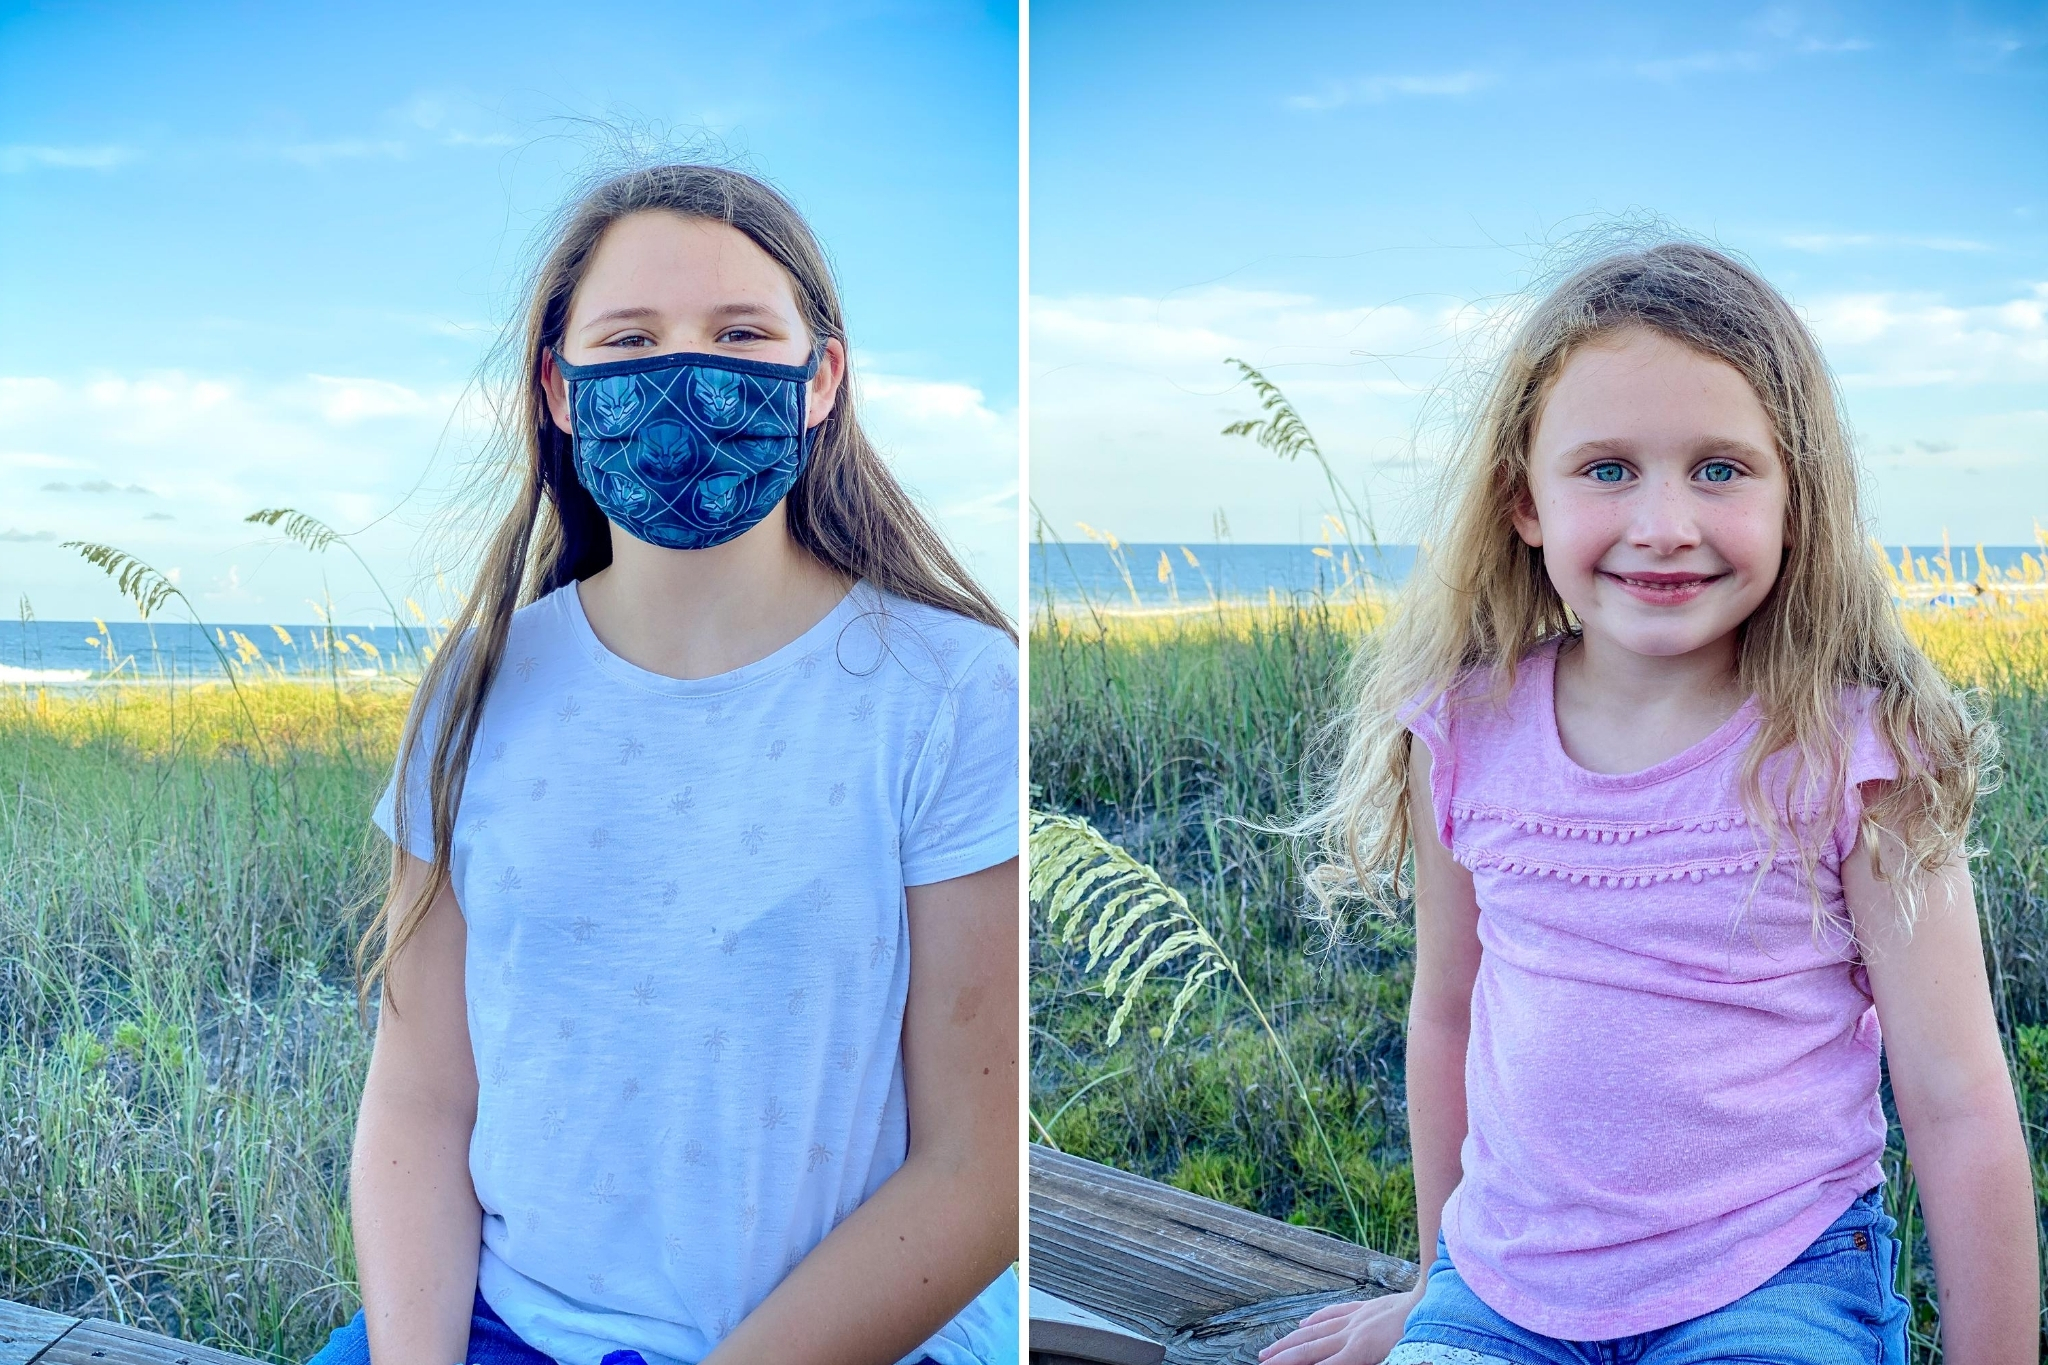 girls at the beach, one in a mask